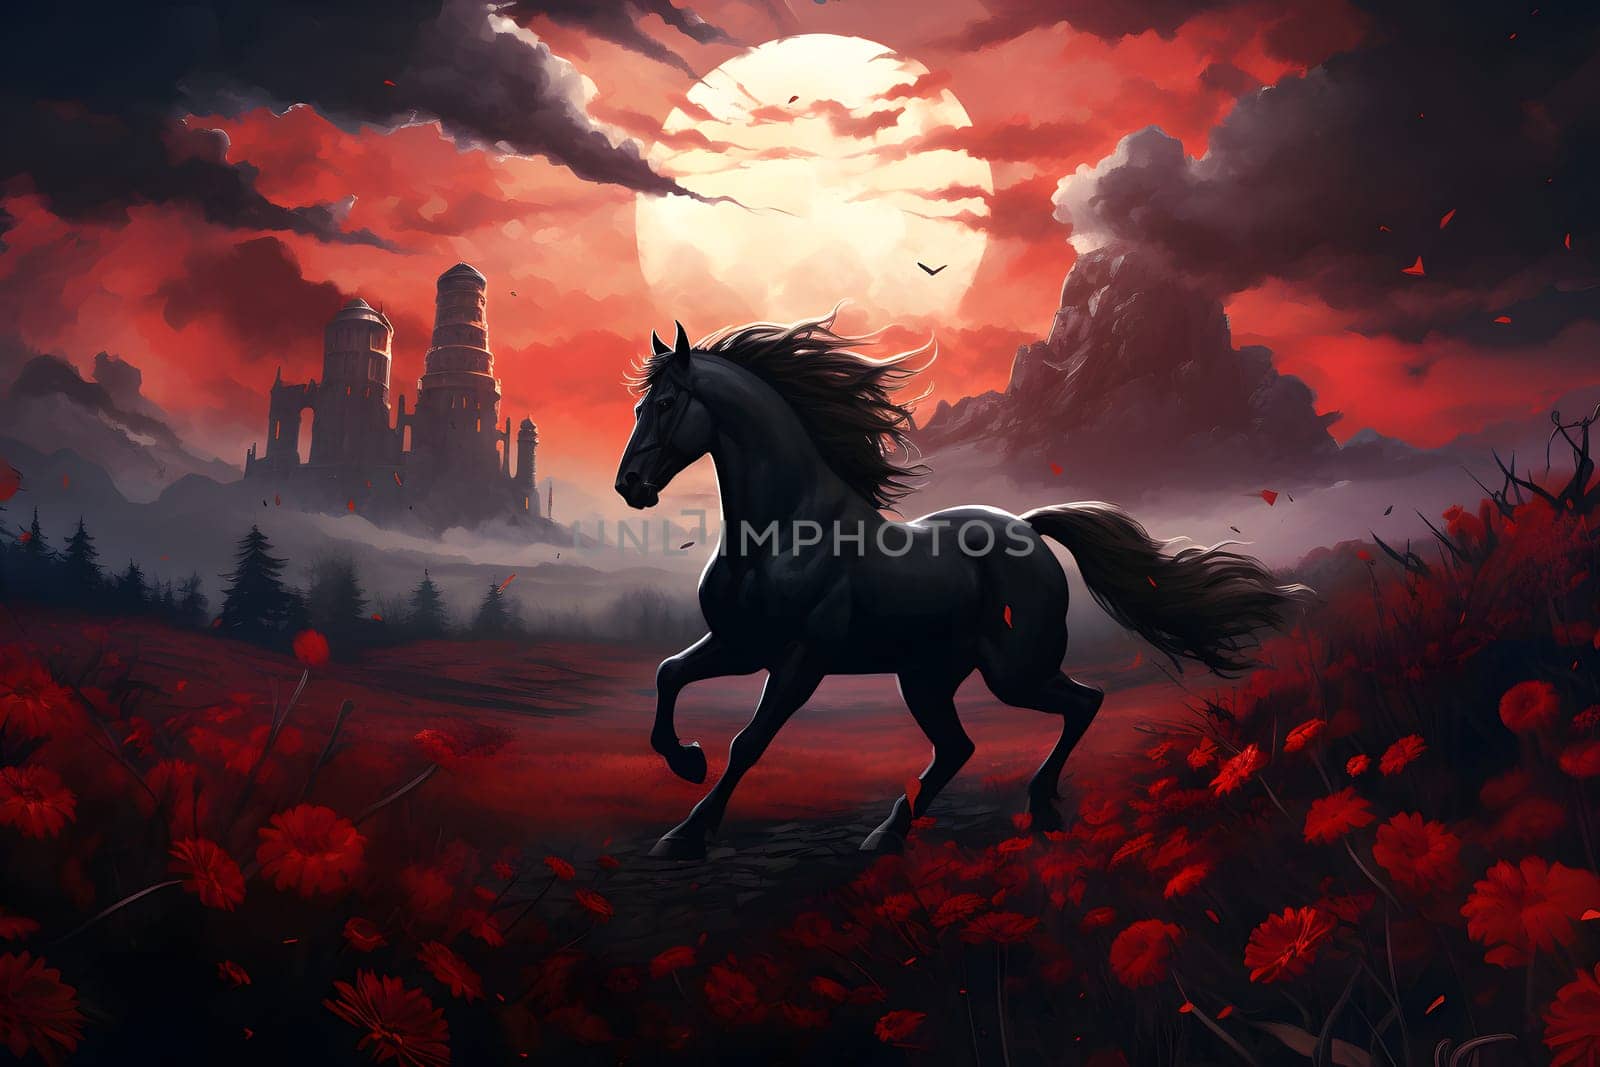 sinister dark horse running in a gloomy red field of flowers, in front of castle with dramatic clouds in sunset sky, neural network generated image by z1b